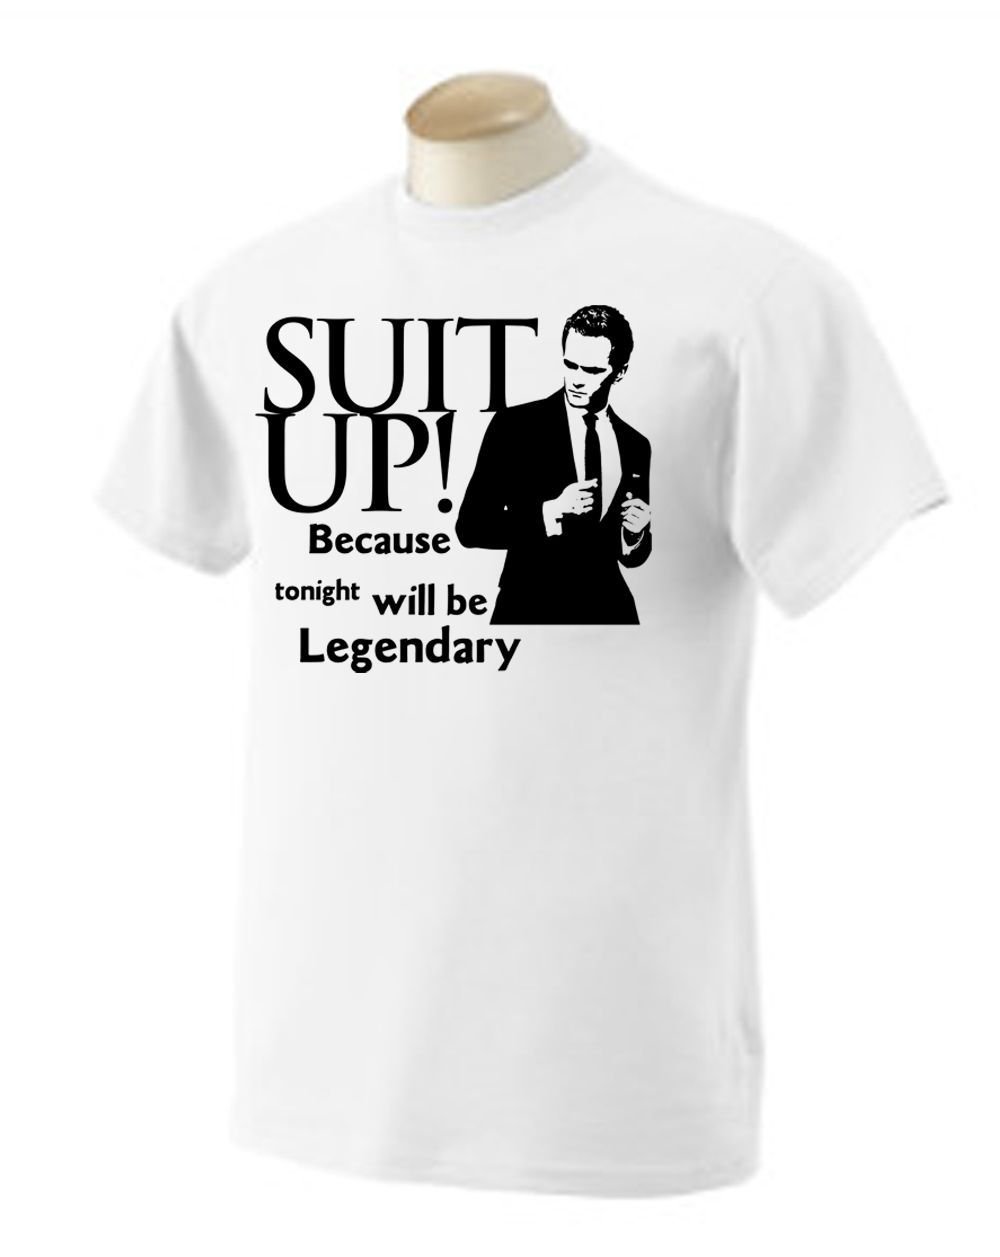 himym Barney Stinson Suit Up Legendary How I Met Your Mother T-shirt